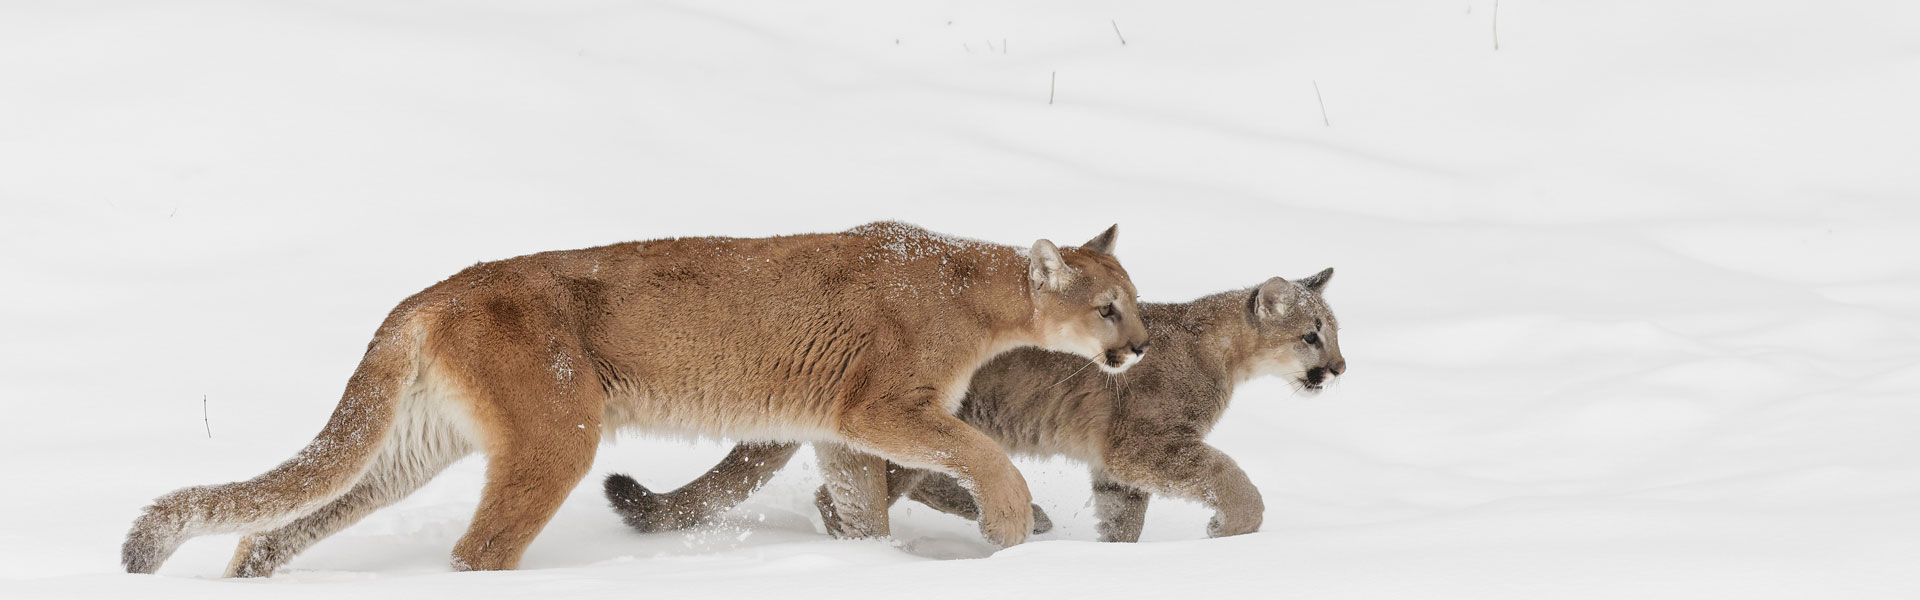 Mountain lion and cub walking in snow